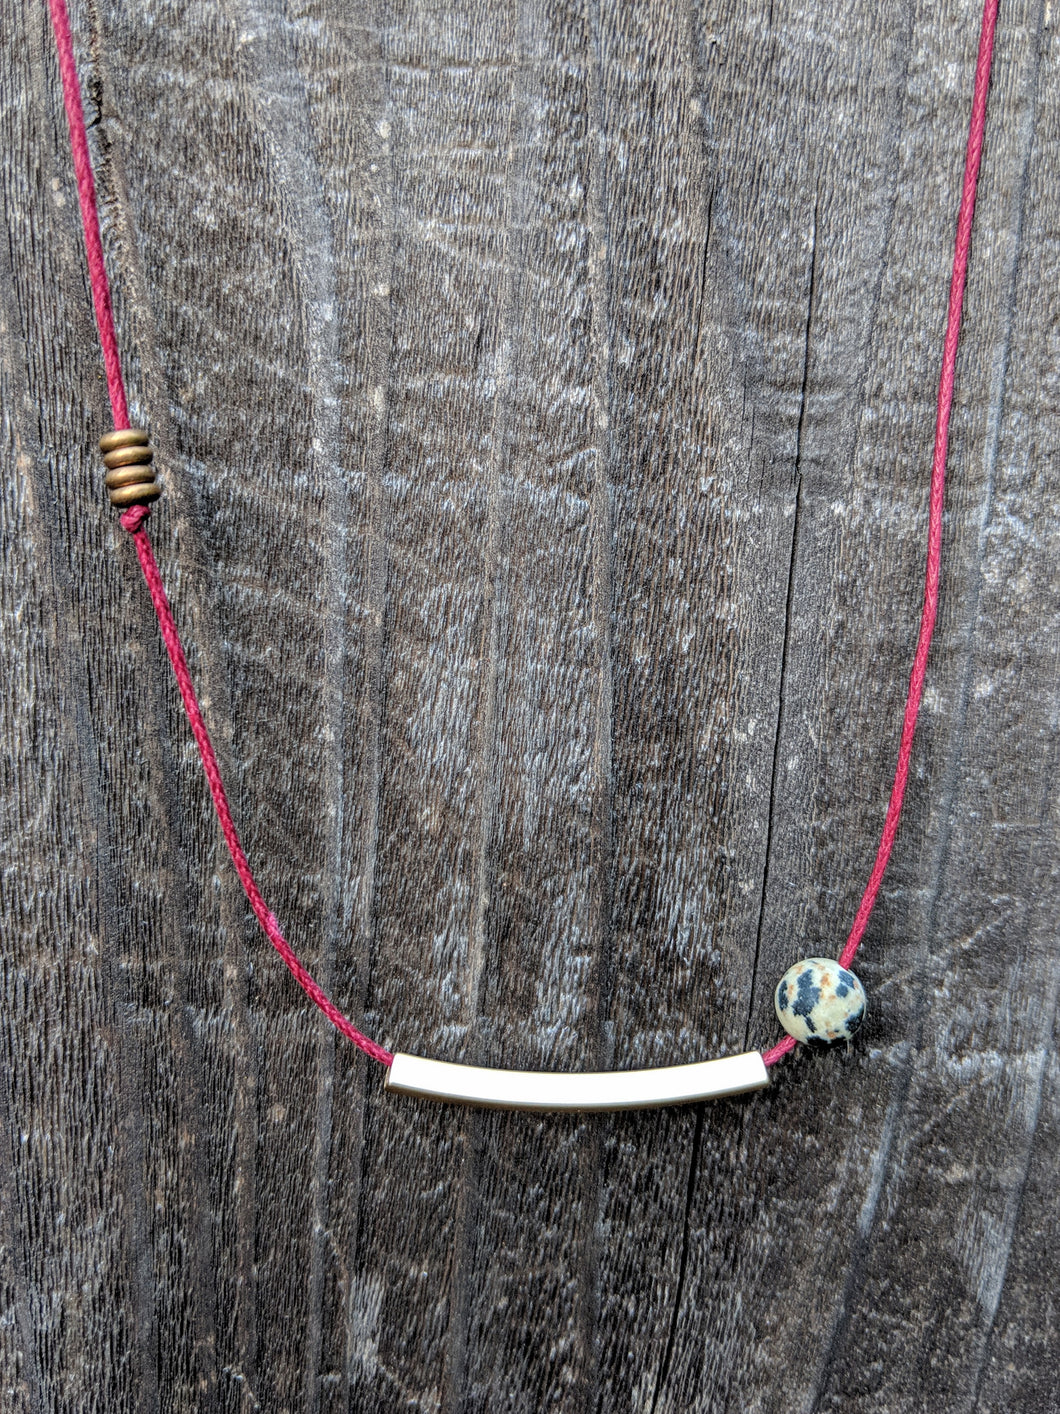 Off Centered Necklace